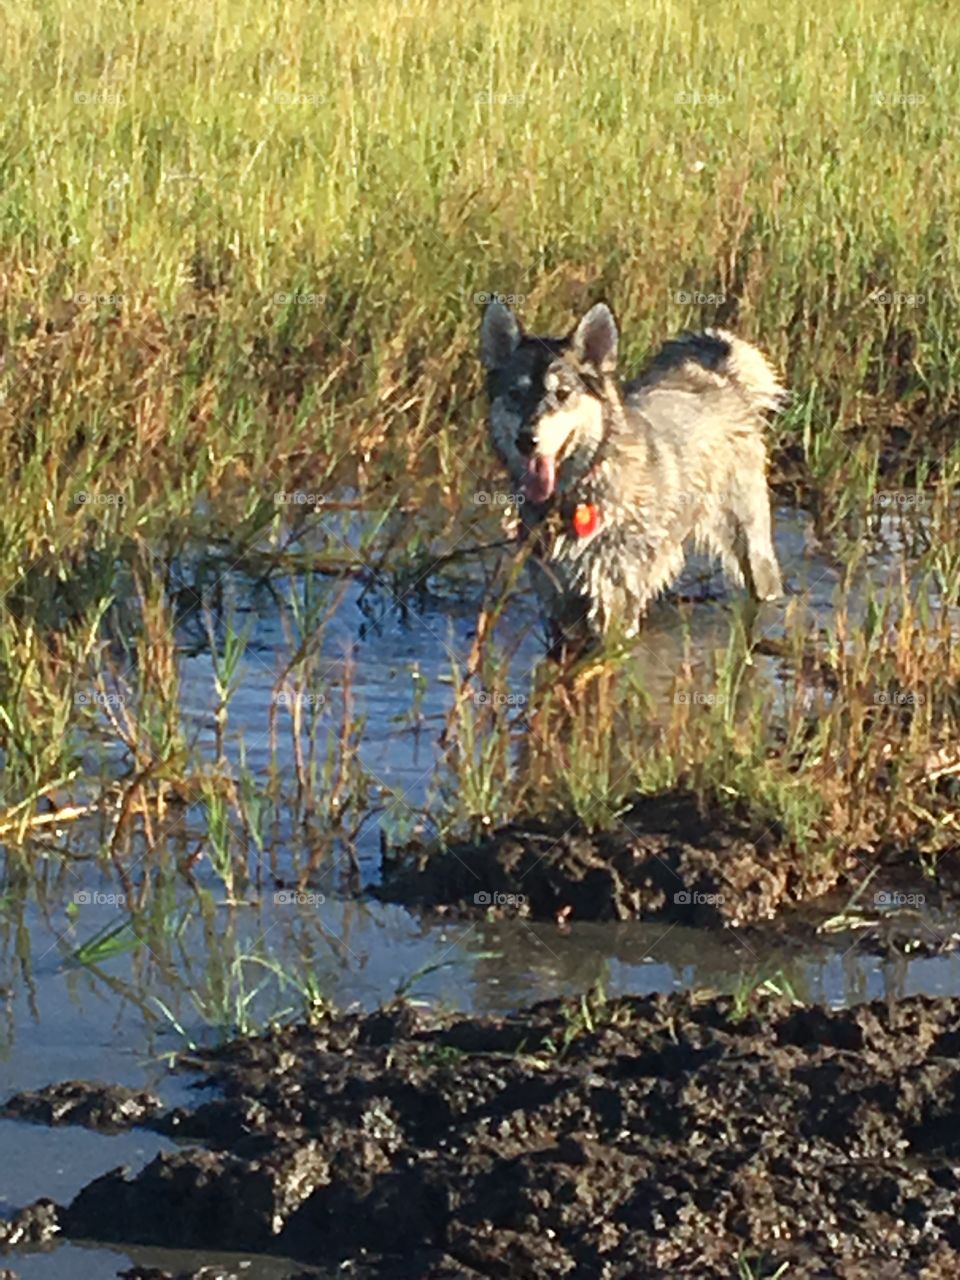 Off leash husky dog running through a deep muddy puddle with grass in the background 